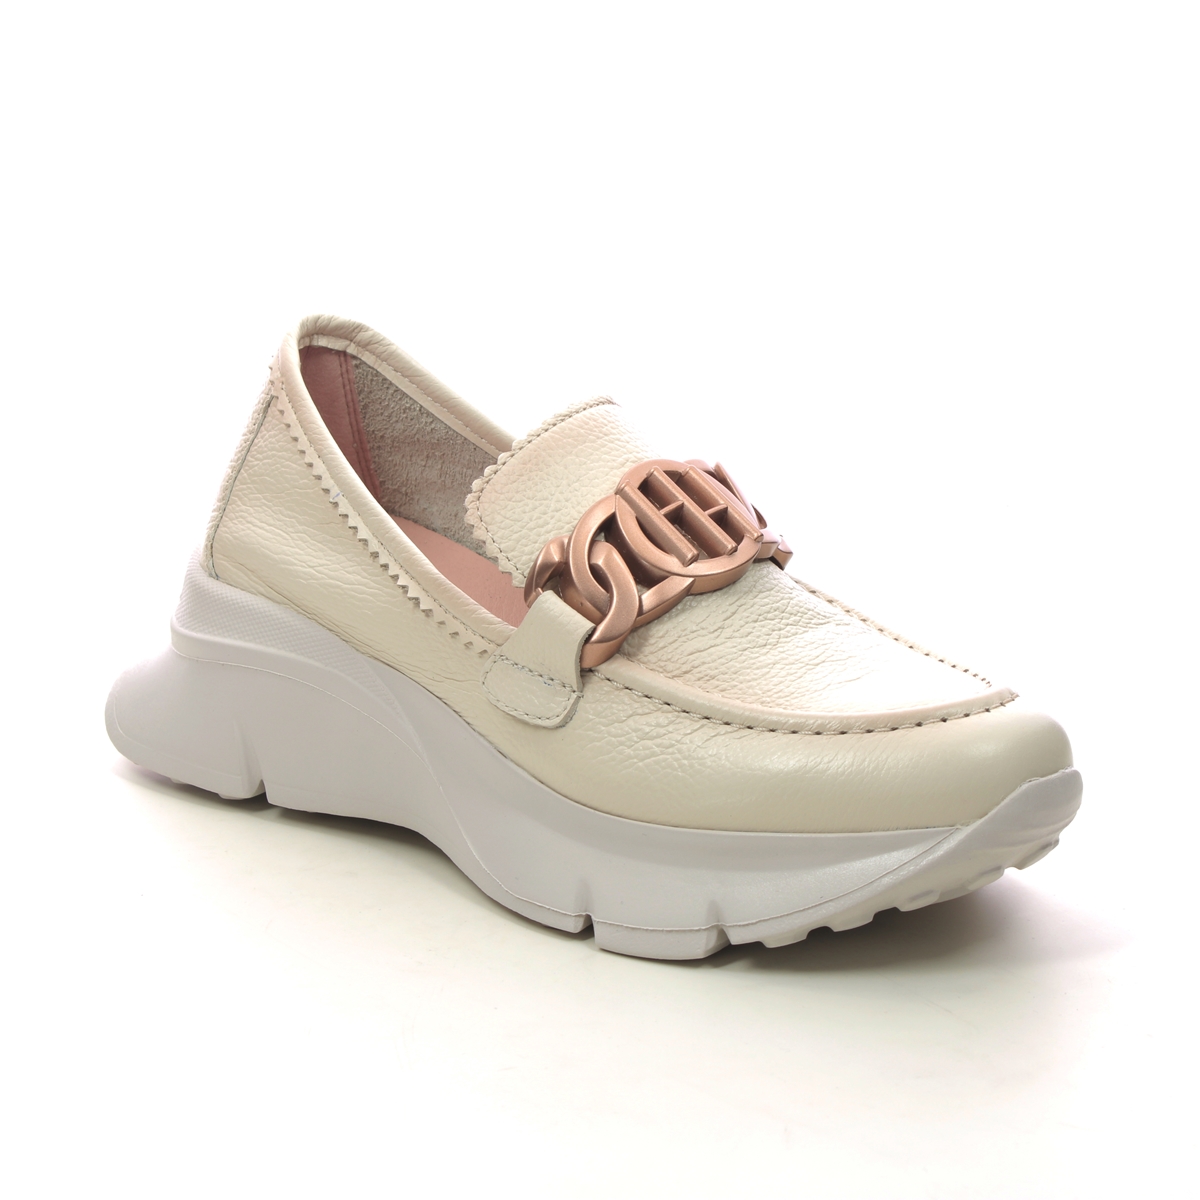 Hispanitas Hawaii Beige leather Womens loafers HV243307-002 in a Plain Leather in Size 37